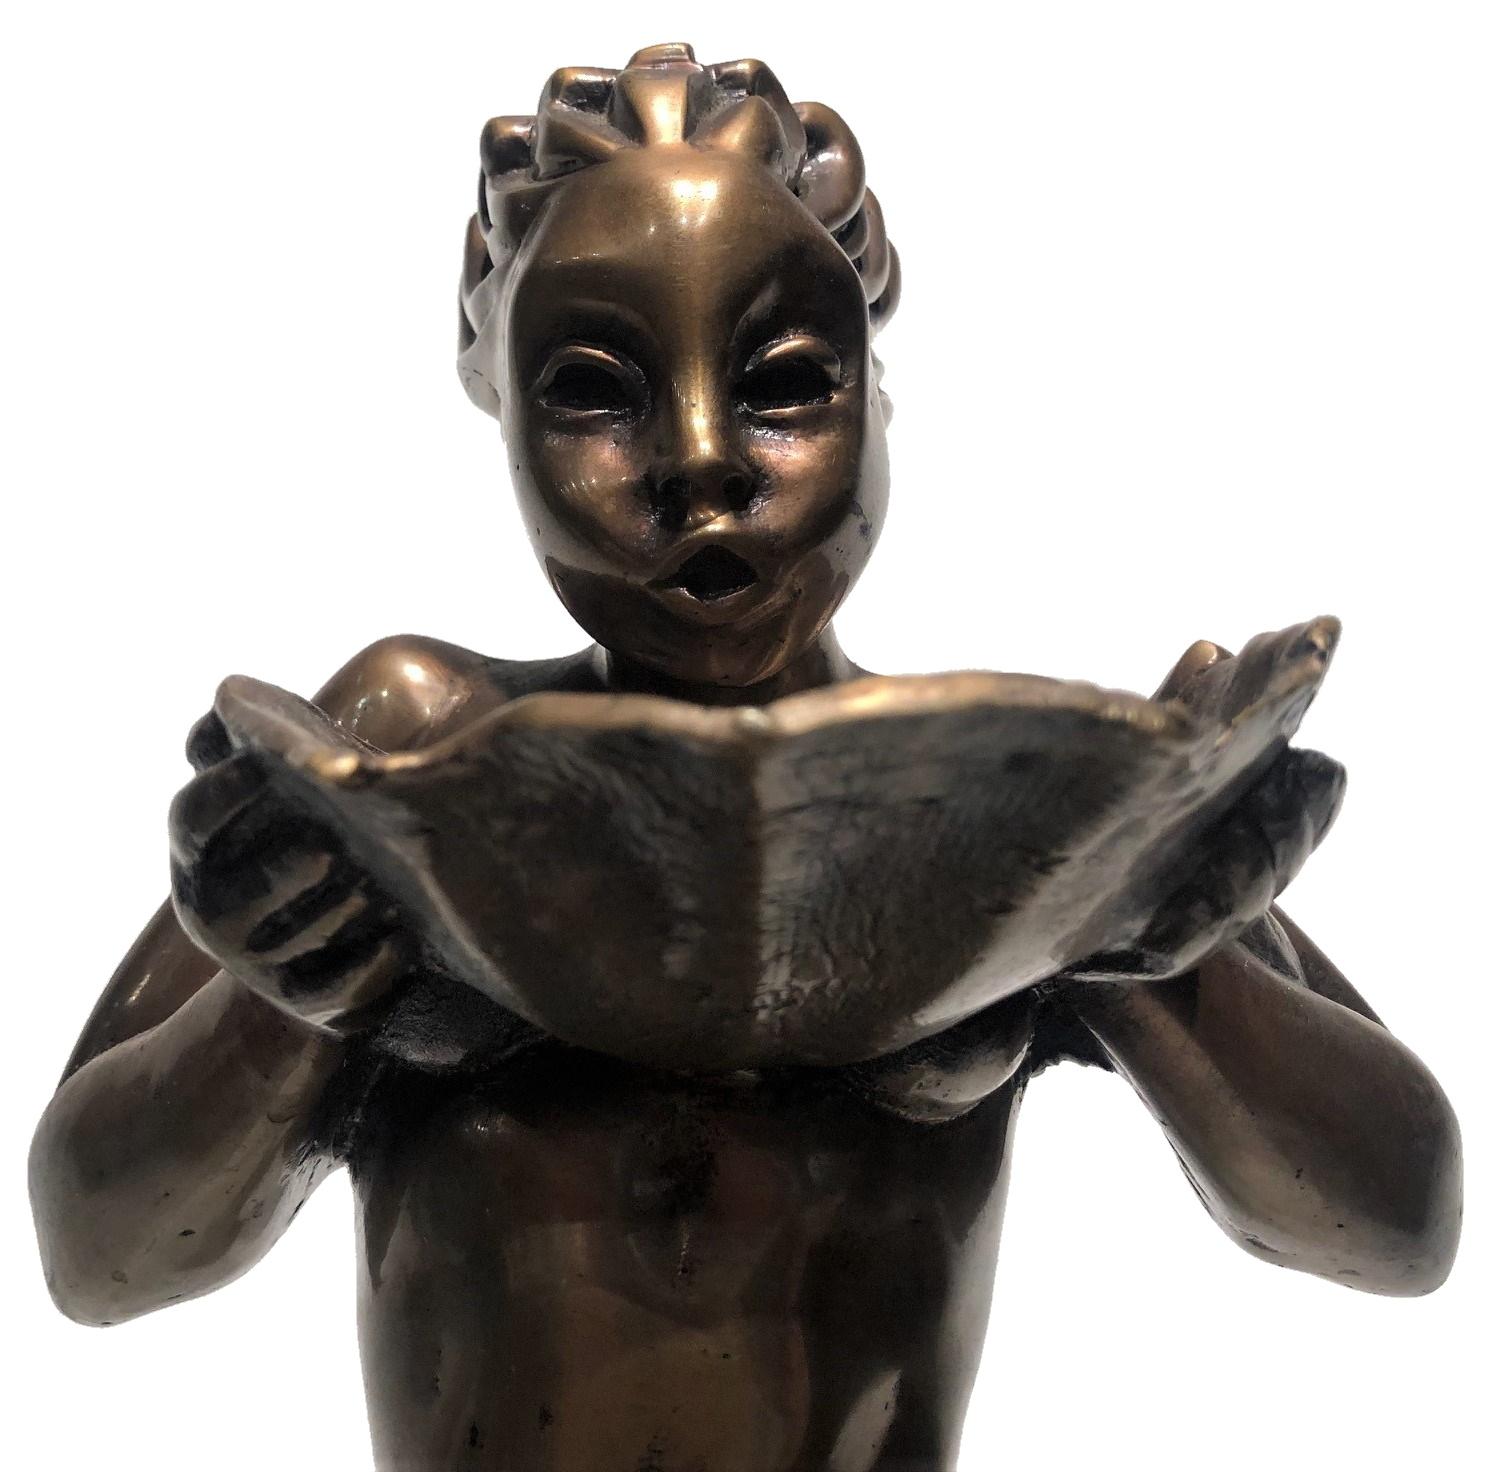 ABOUT
A light, graceful female figure, as if floating in the air, with hair fluttering in the wind, trying not to spill, carefully carries in front of her a large sea shell filled with water. Probably, this most unusual bronze sculpture was part of